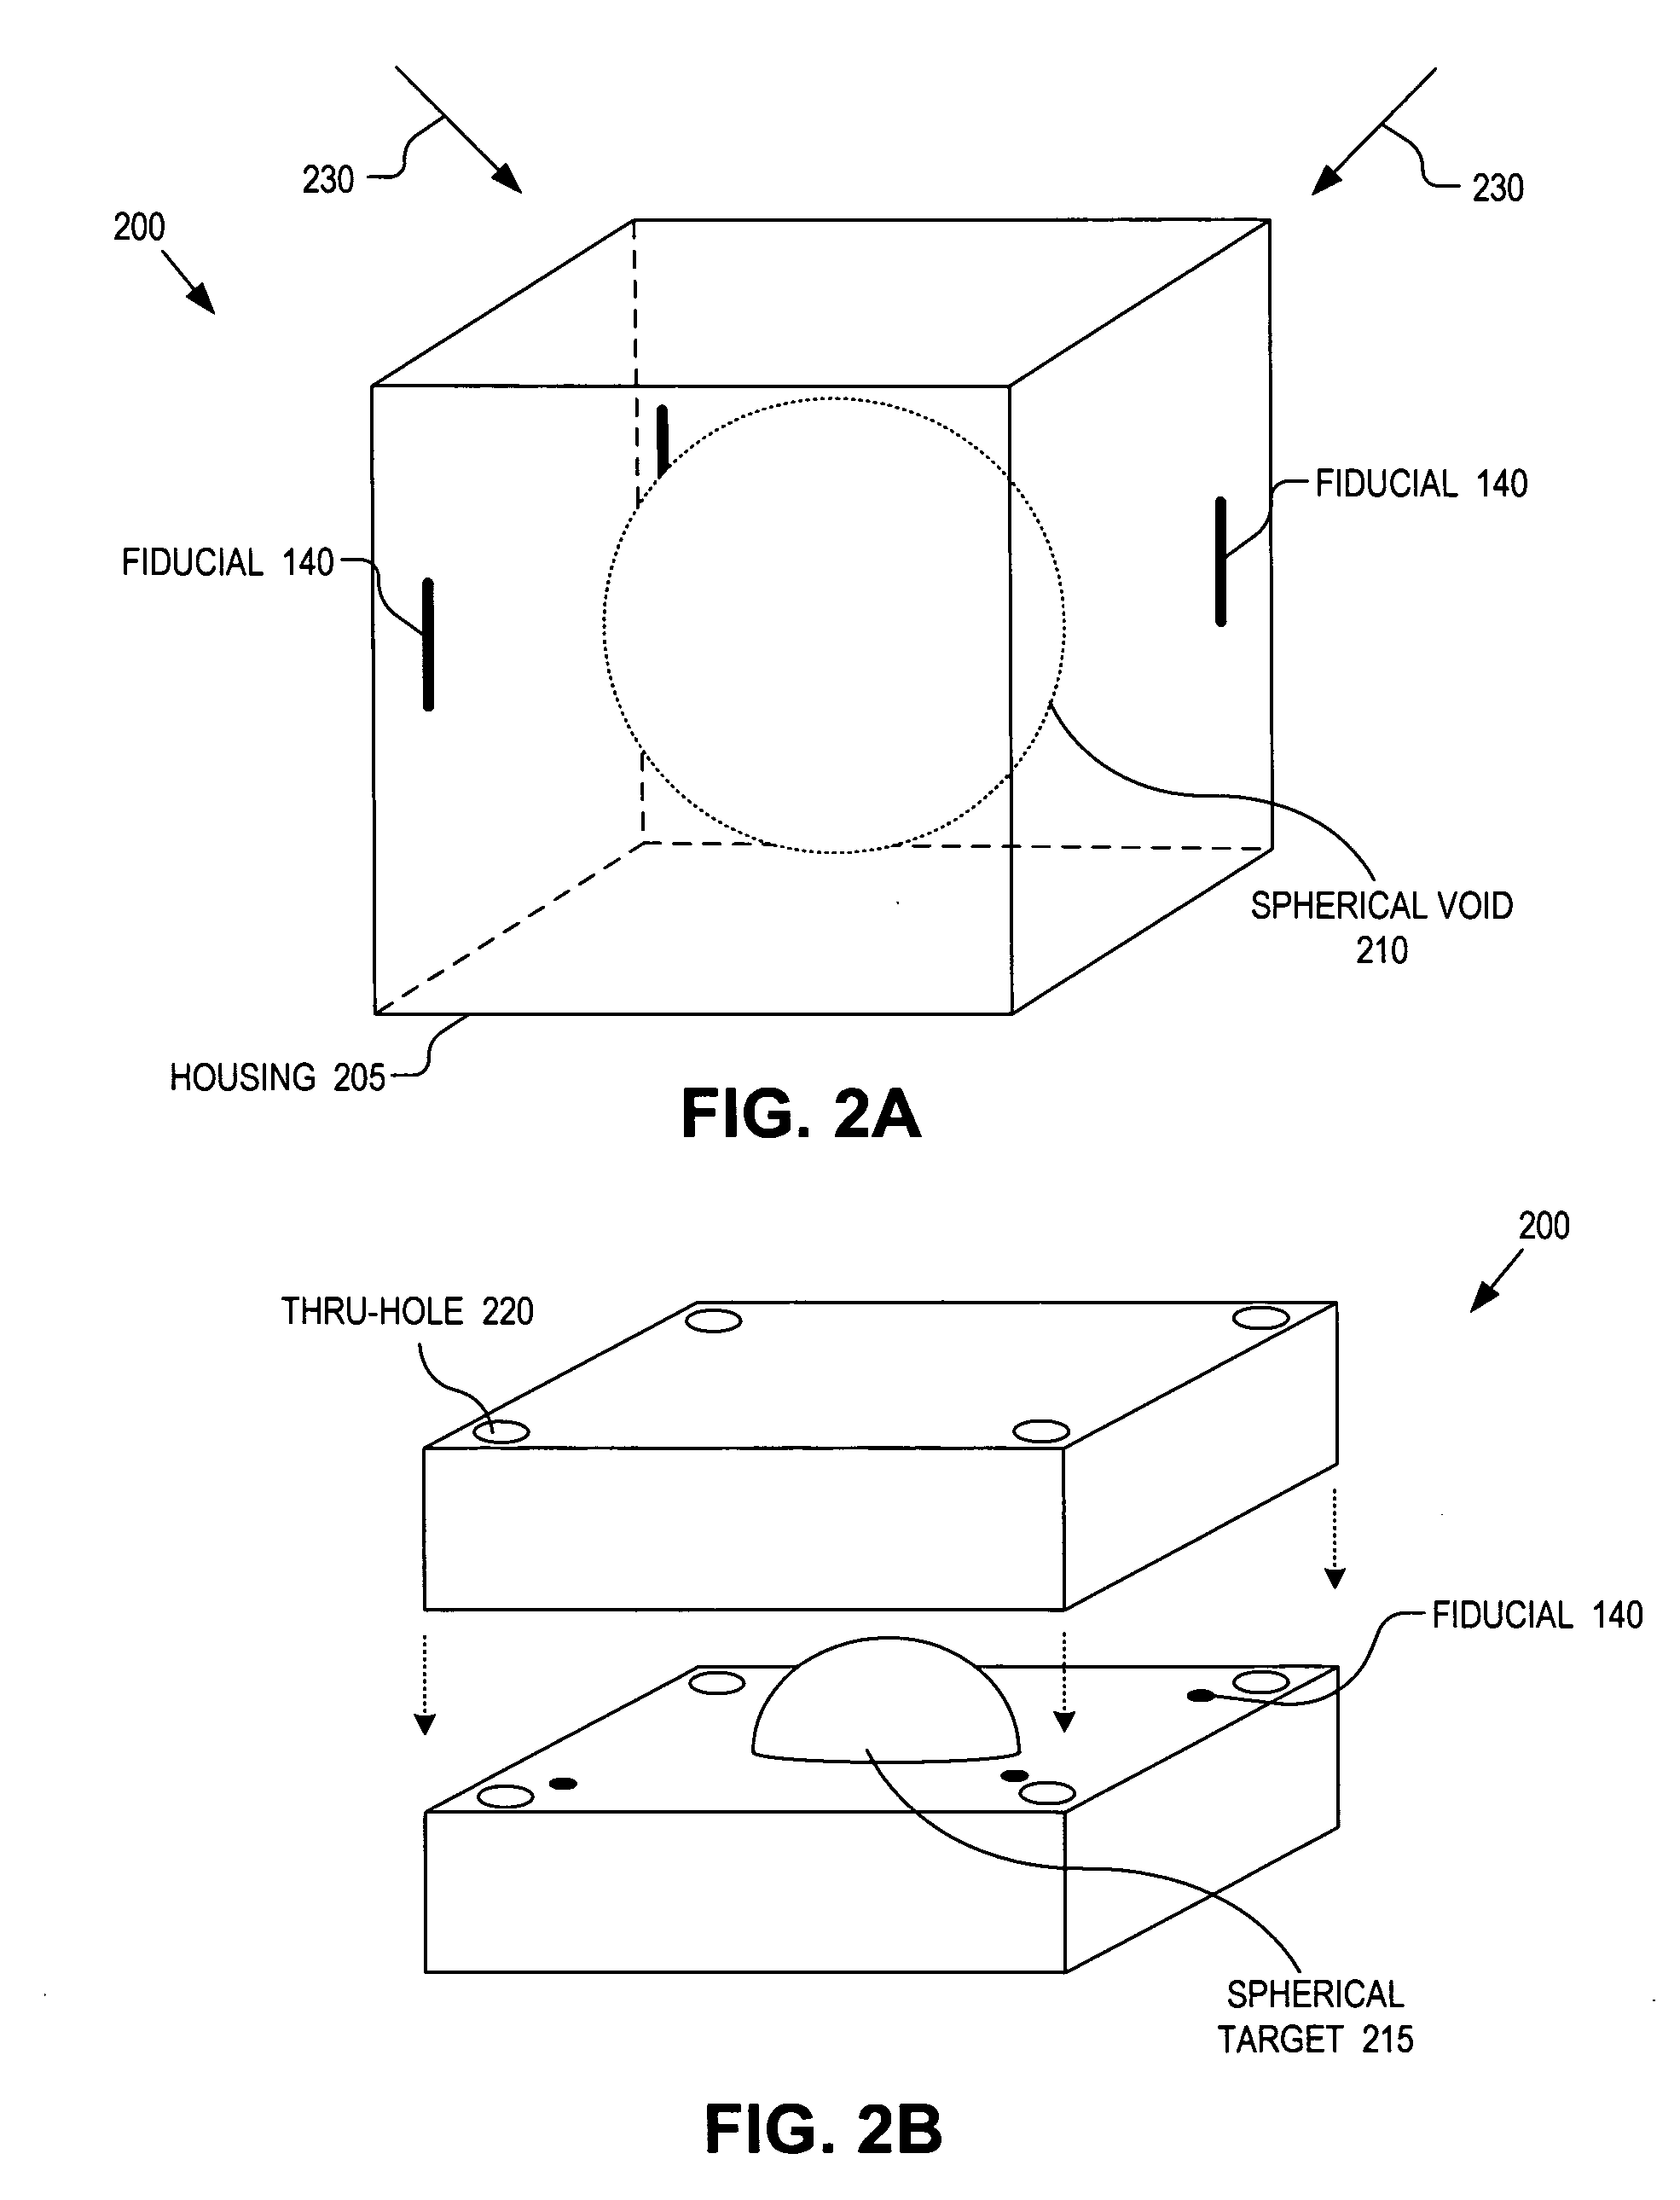 Integrated quality assurance for an image guided radiation treatment delivery system